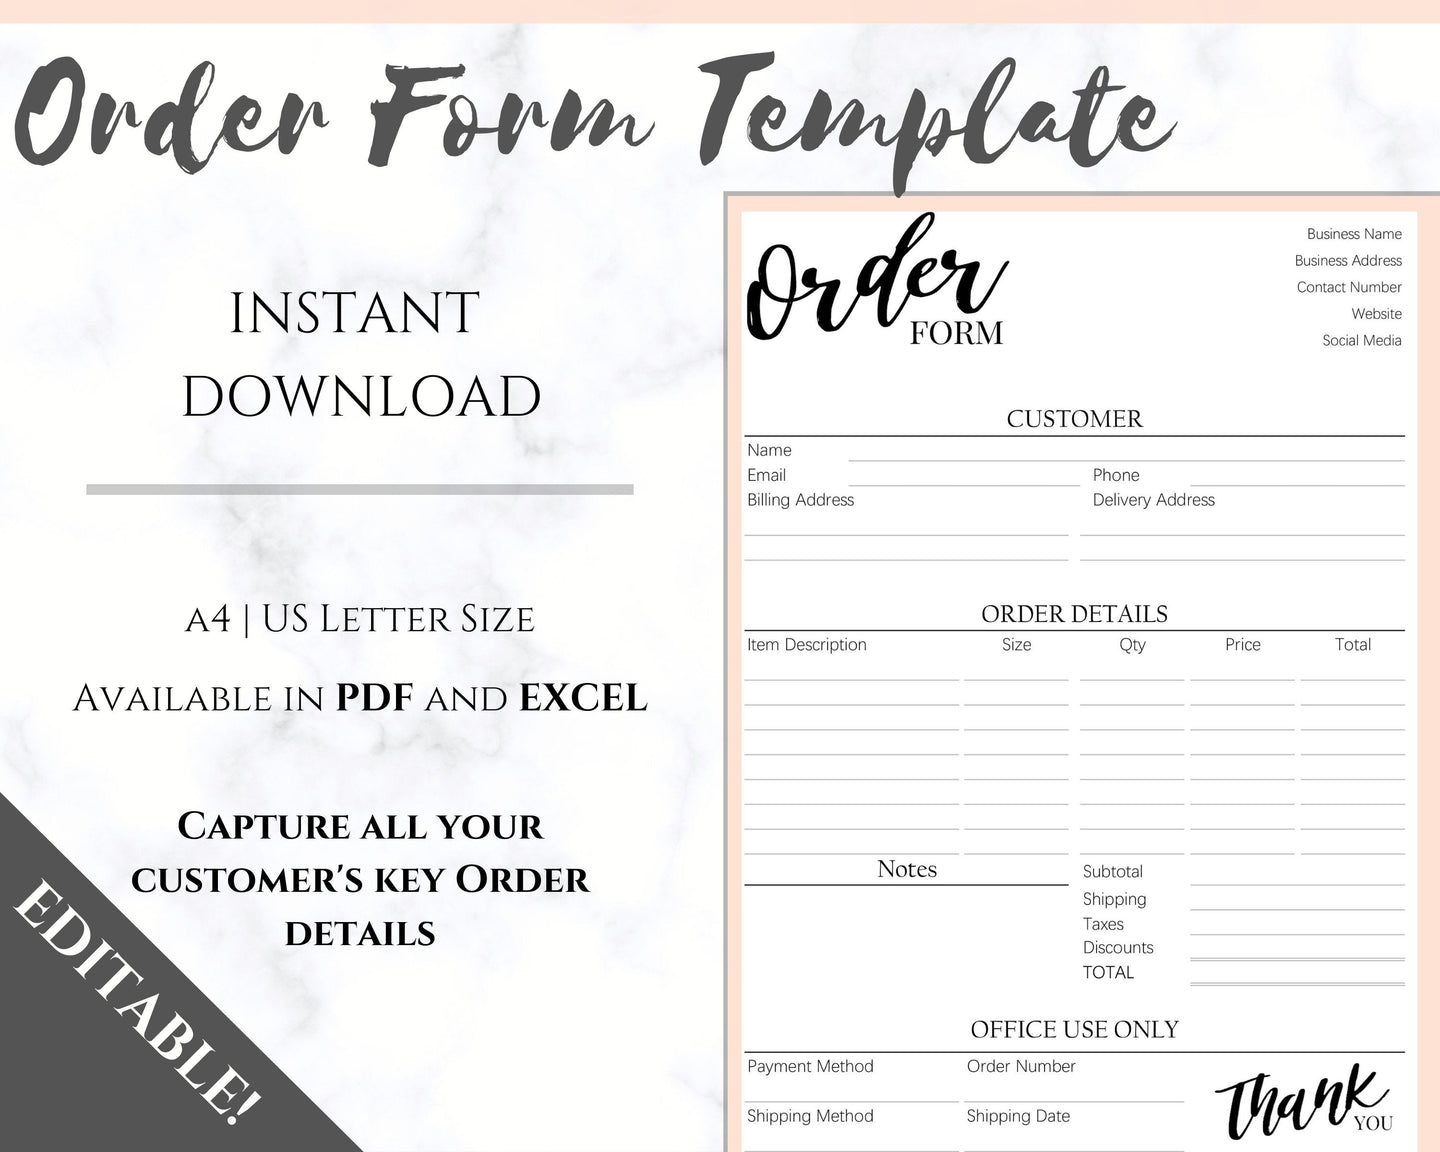 ORDER FORM Invoice Template, EDITABLE Custom Receipt Template, Printable Customer Sales Order Invoice, Receipt Form, Edit, Download A4 Pdf | Style 6